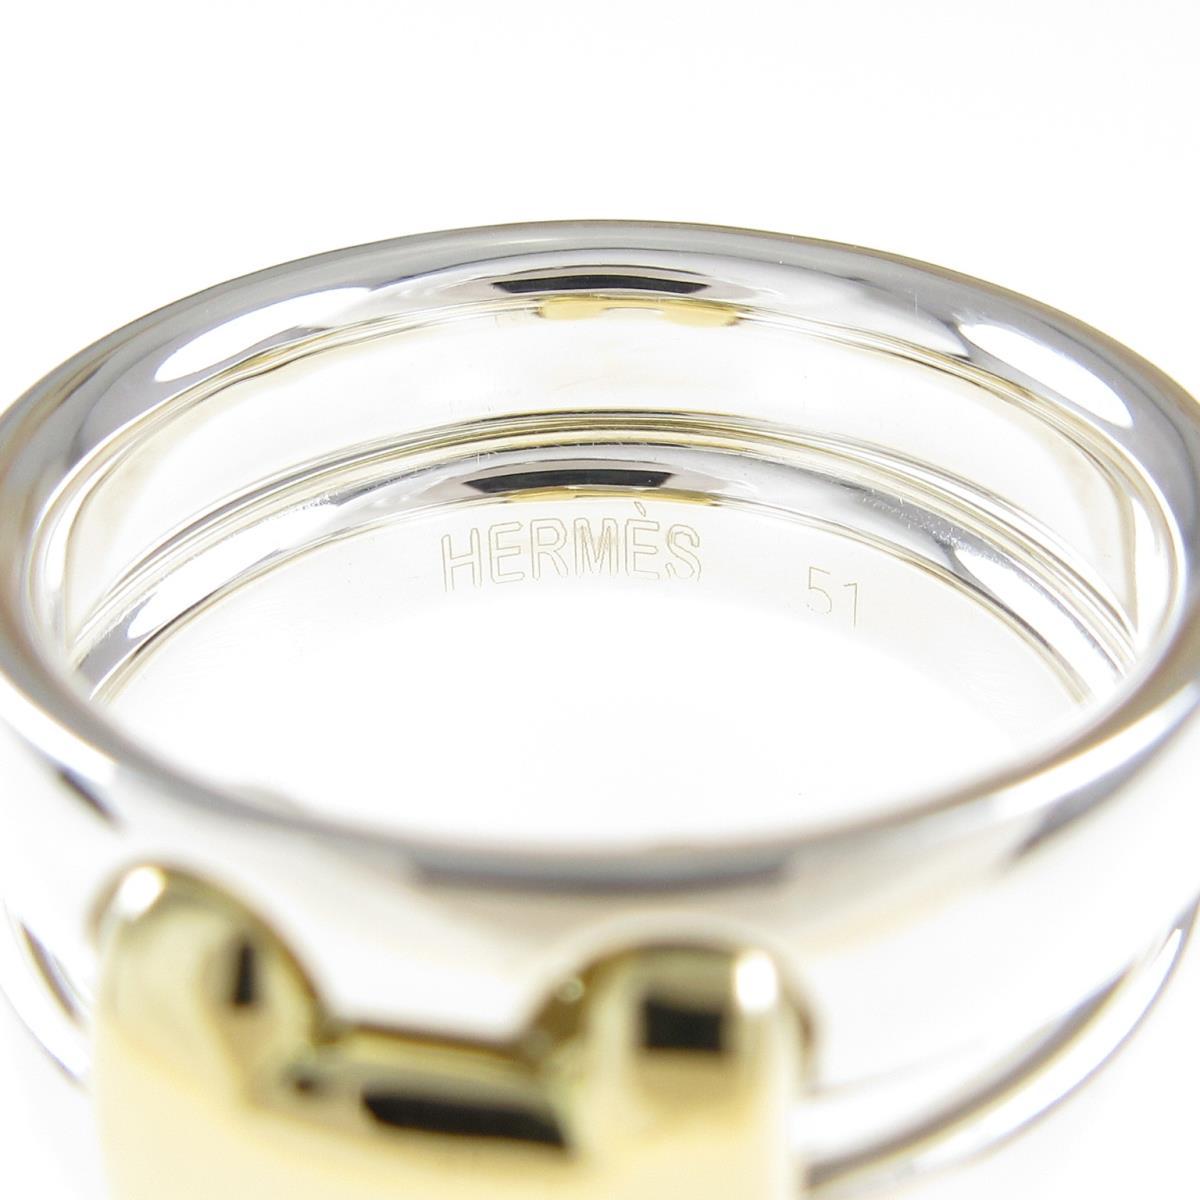 Authentic HERMES Olympe Ring #260-003-738-9628 | eBay